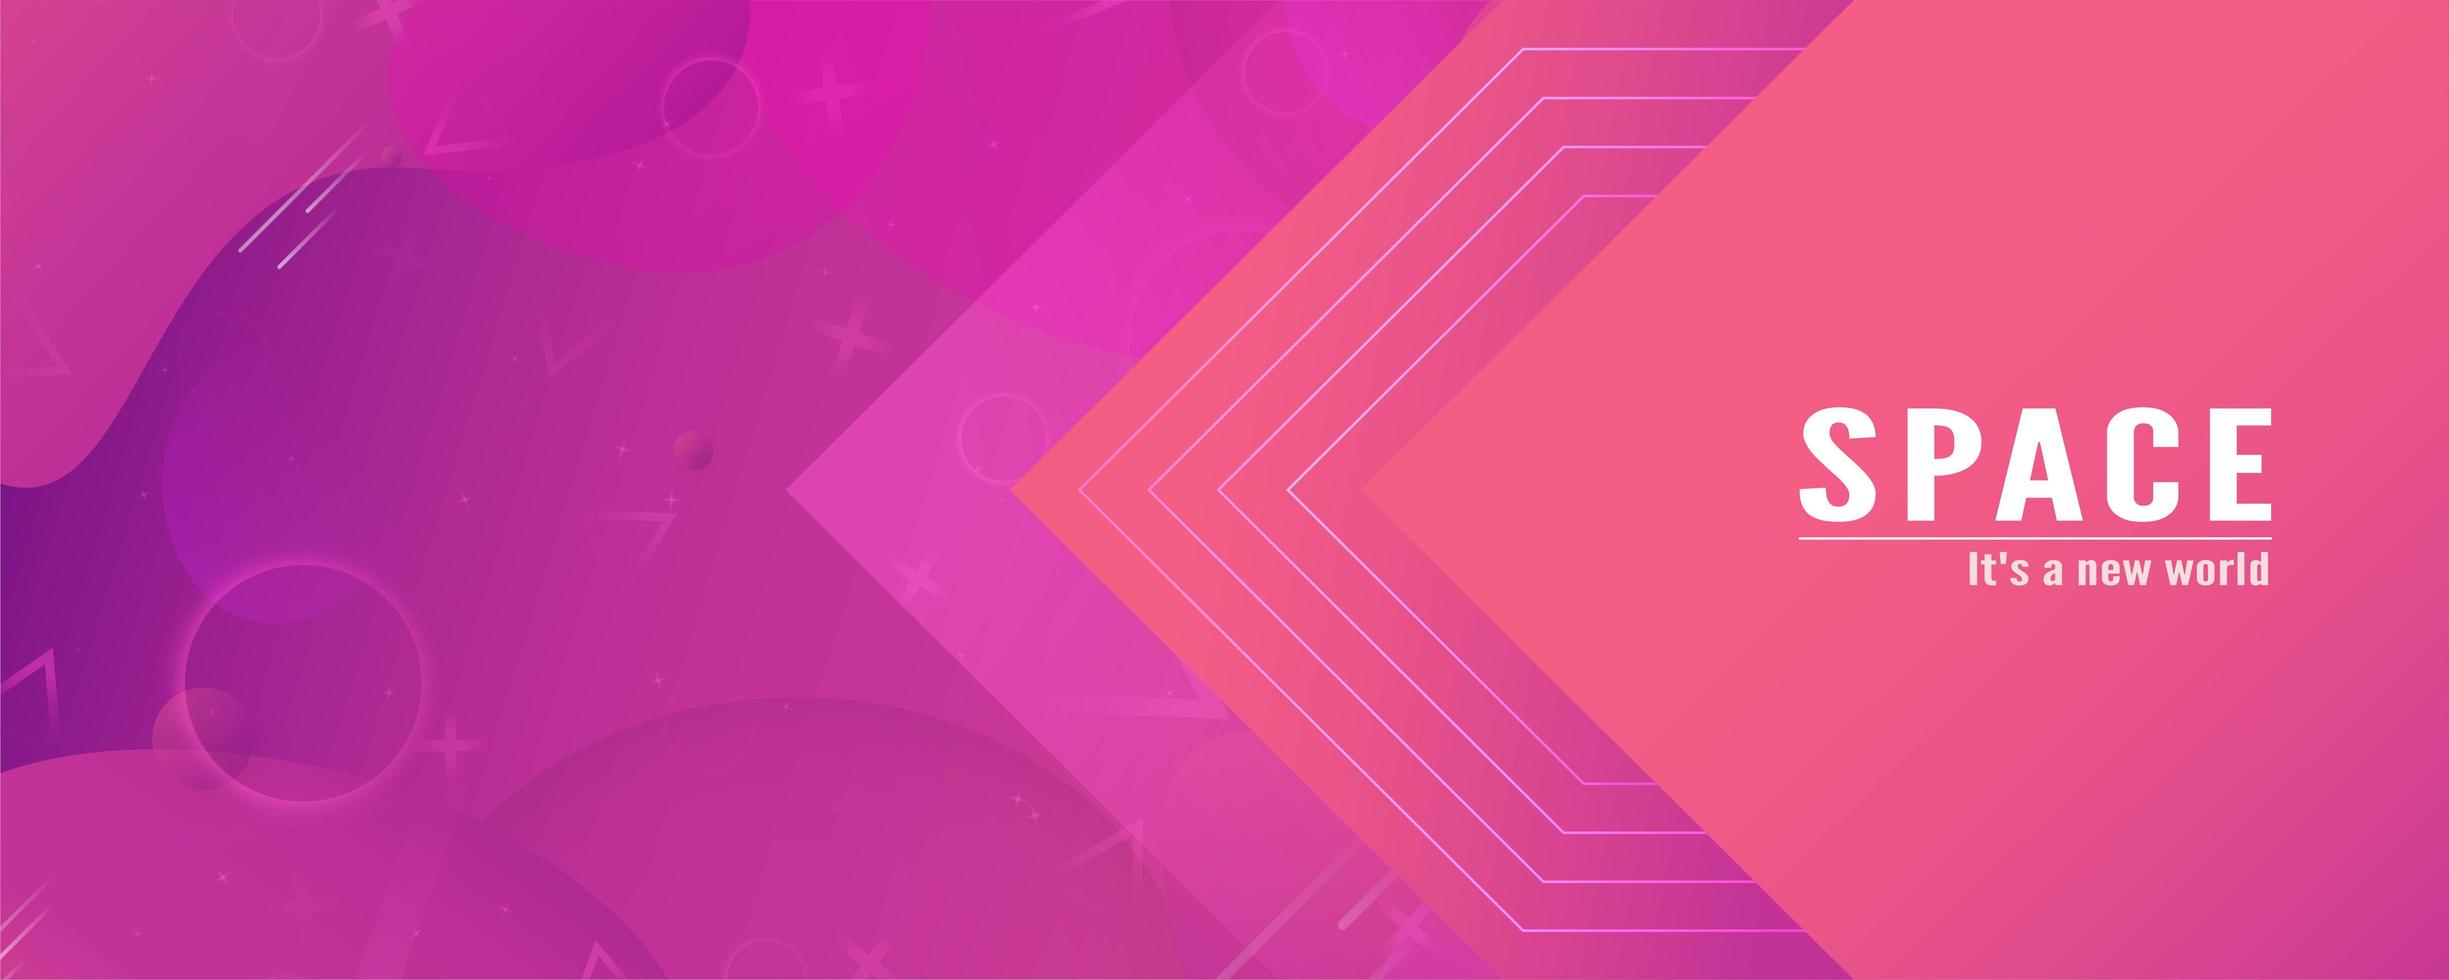 Pink Gradient Geometric and Fluid Shapes Banner  vector